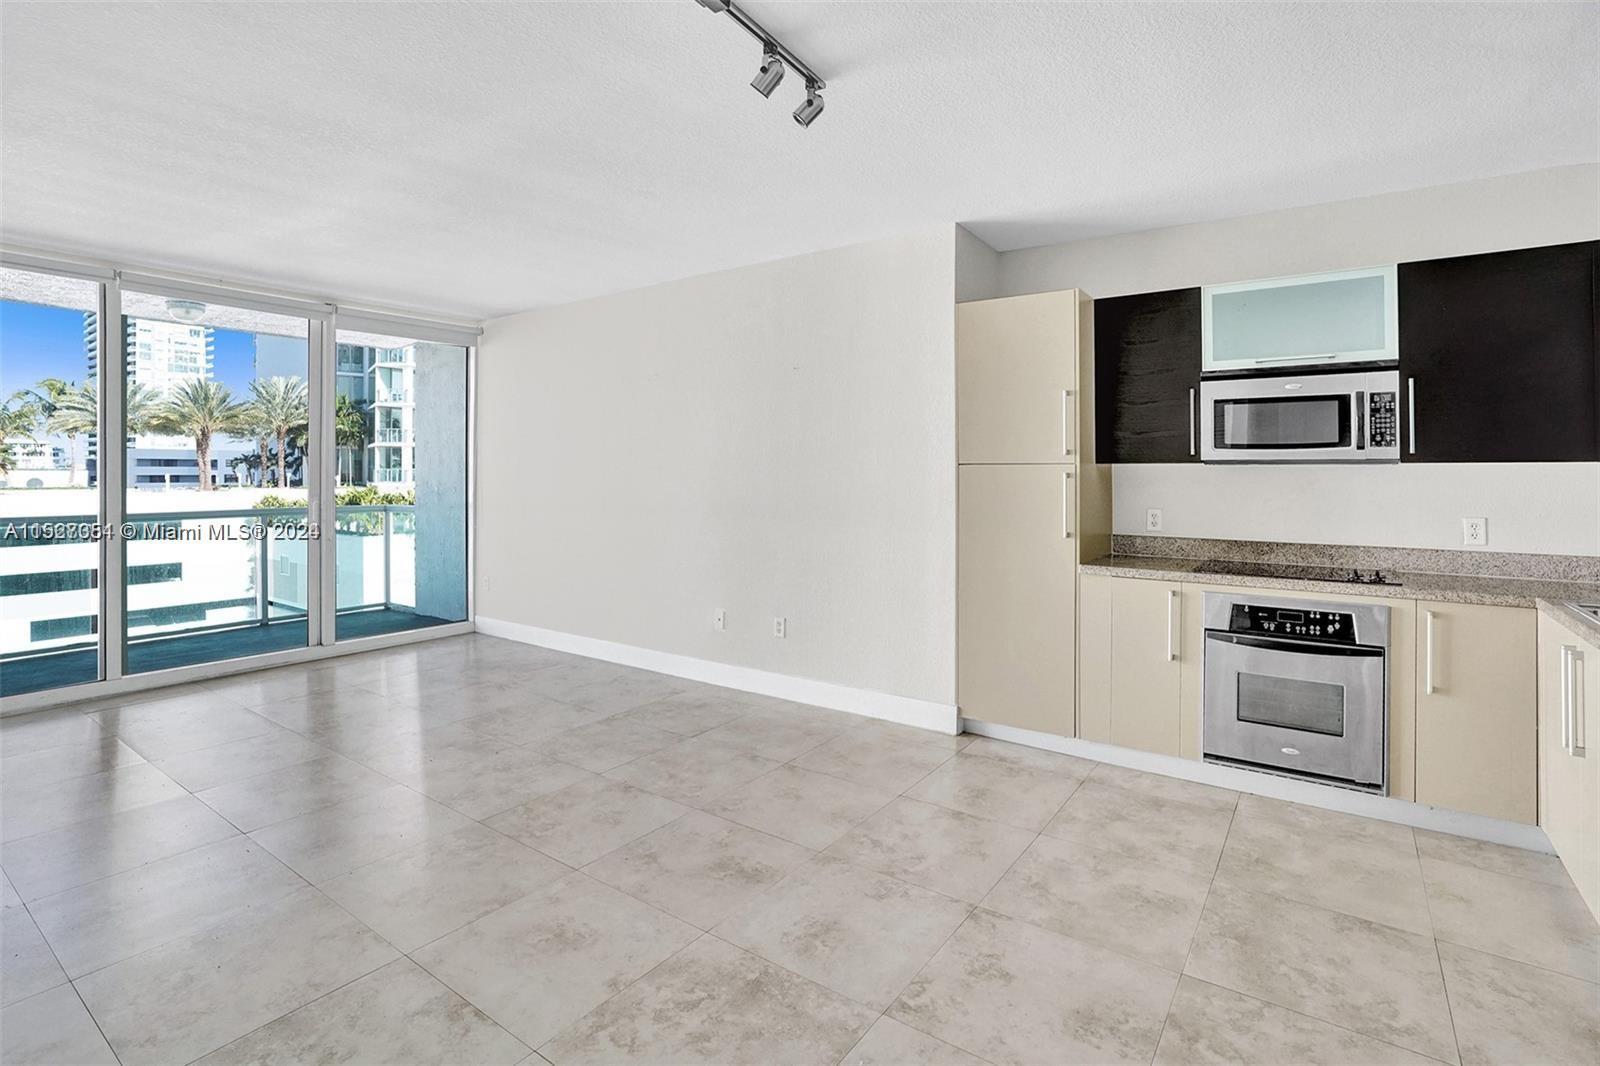 Great 1-Bed 1-Bath in a super nice boutique building in Miami’s Edgewater. Moon Bay is 12 stories wi